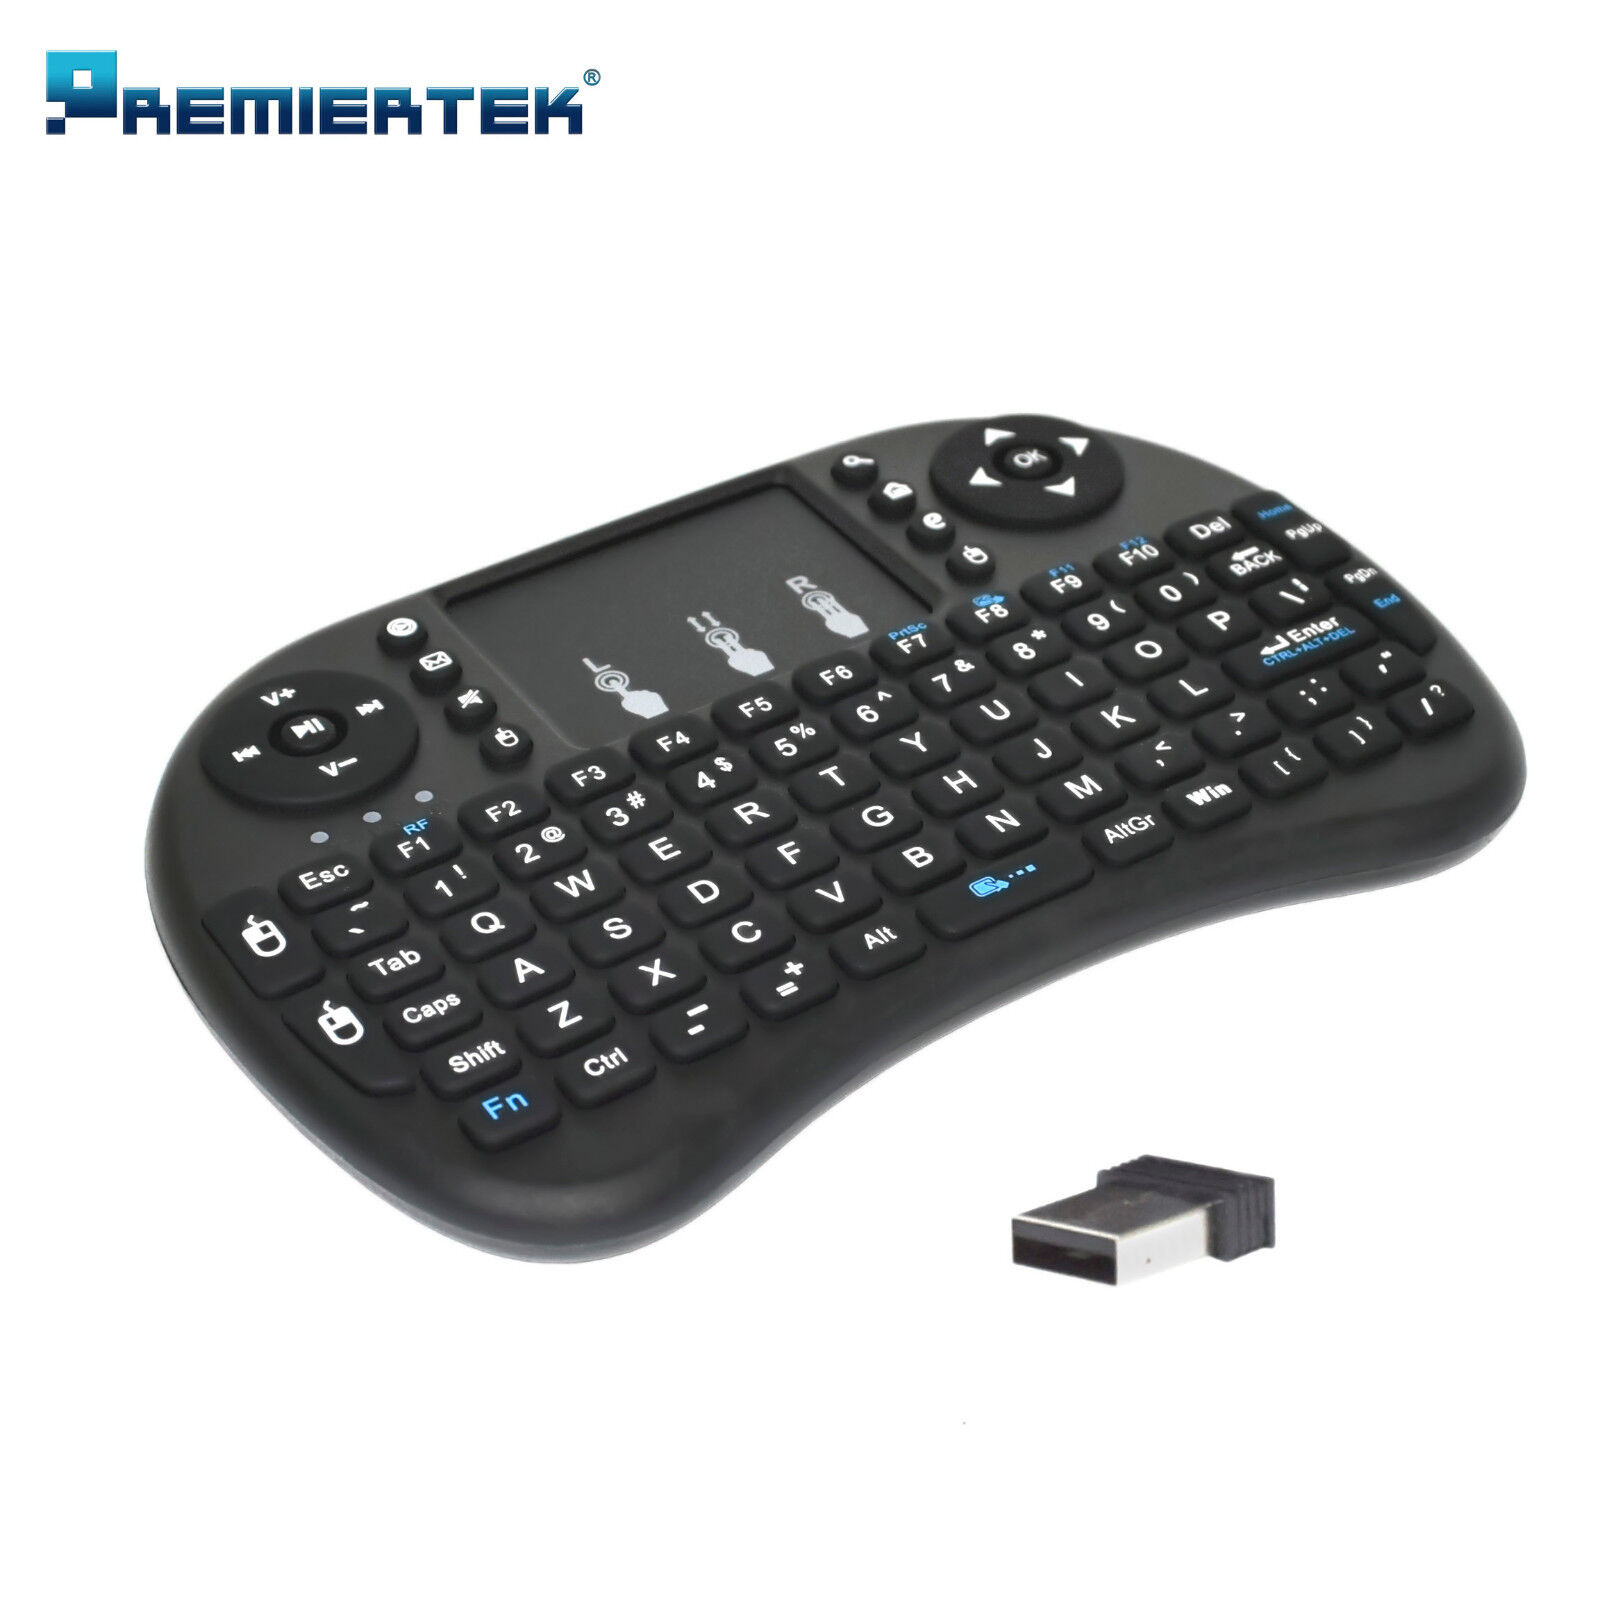 mini i8 2.4GHZ mini Wireless Keyboard Touchpad for Smart TV Android Box PC HTPC